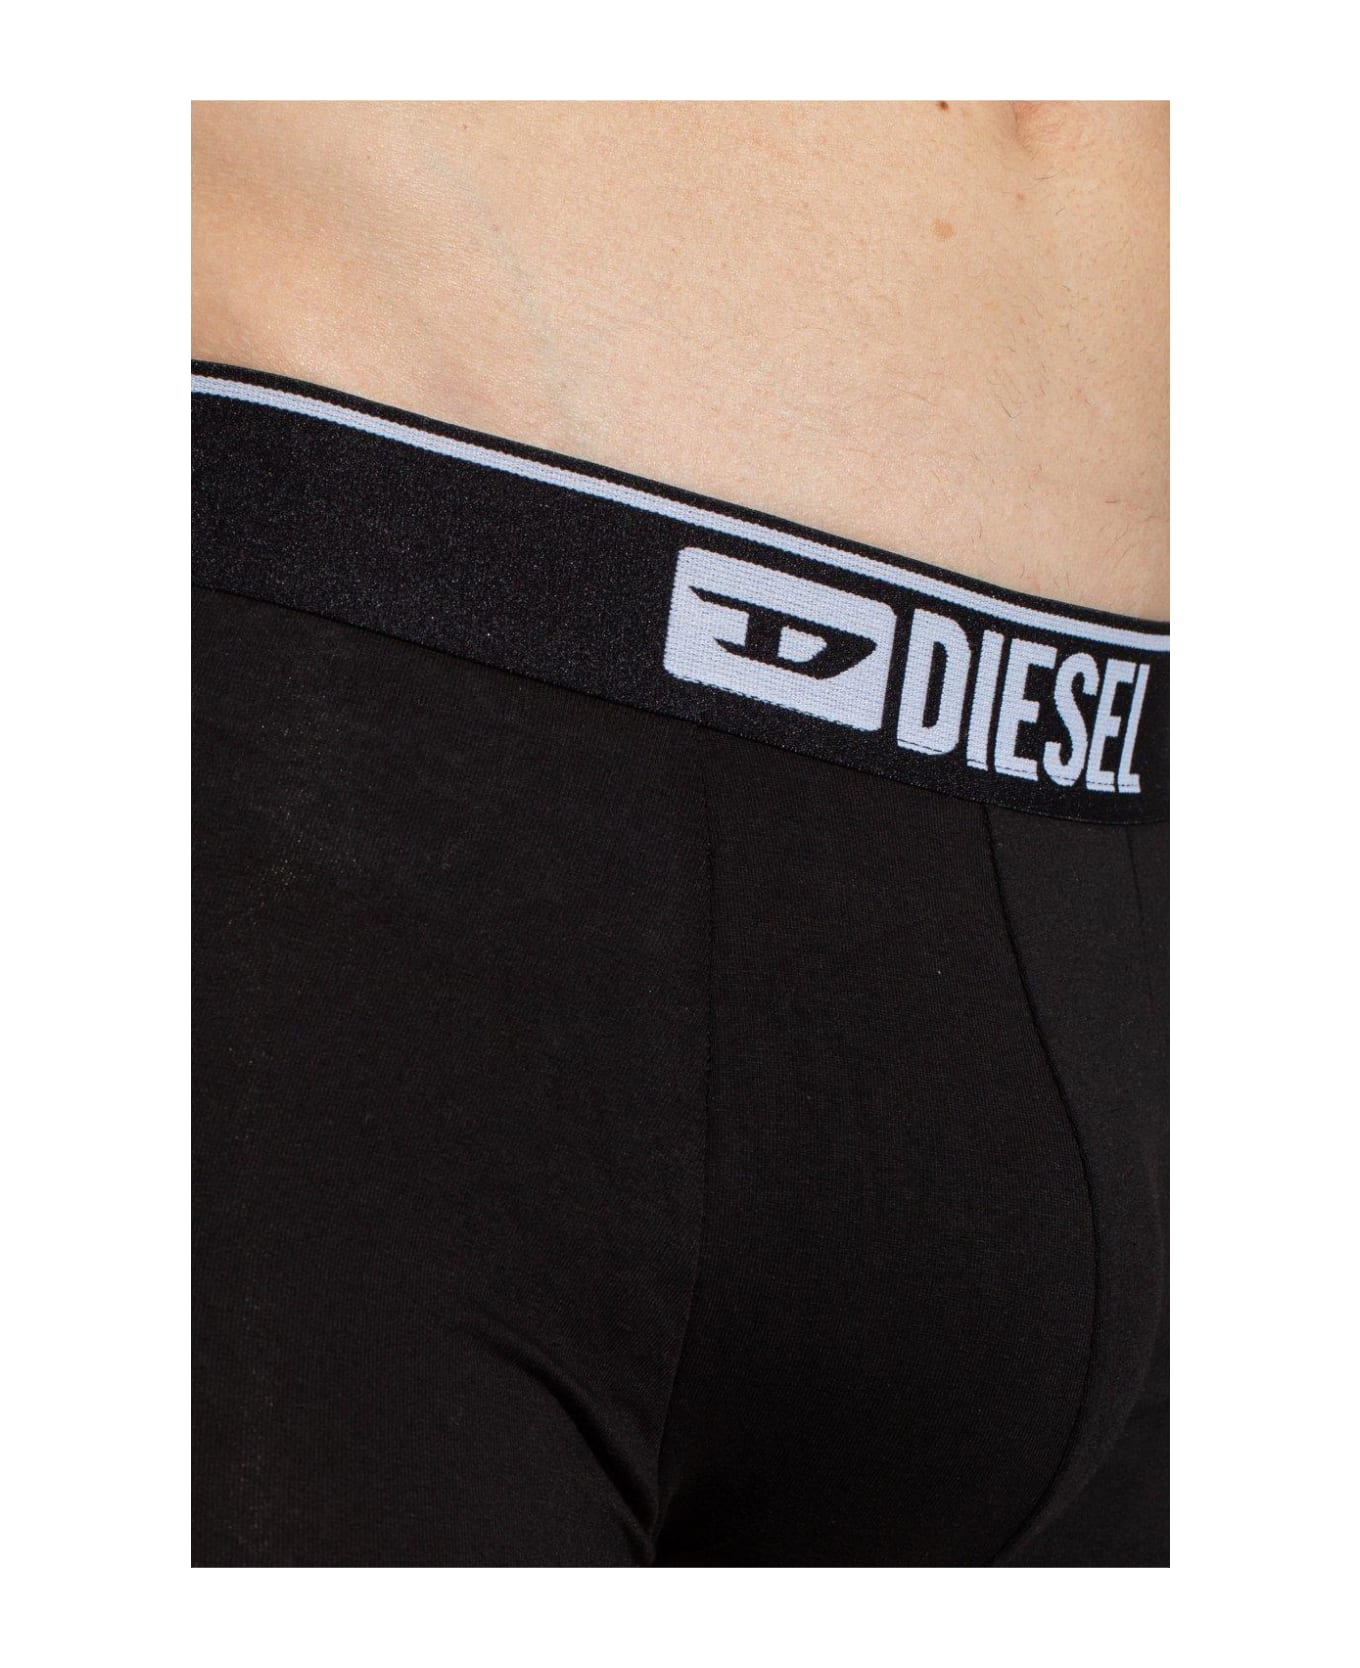 Diesel Umbx-damien Three-pack Logo-embroidered Boxers Set - MultiColour ショーツ